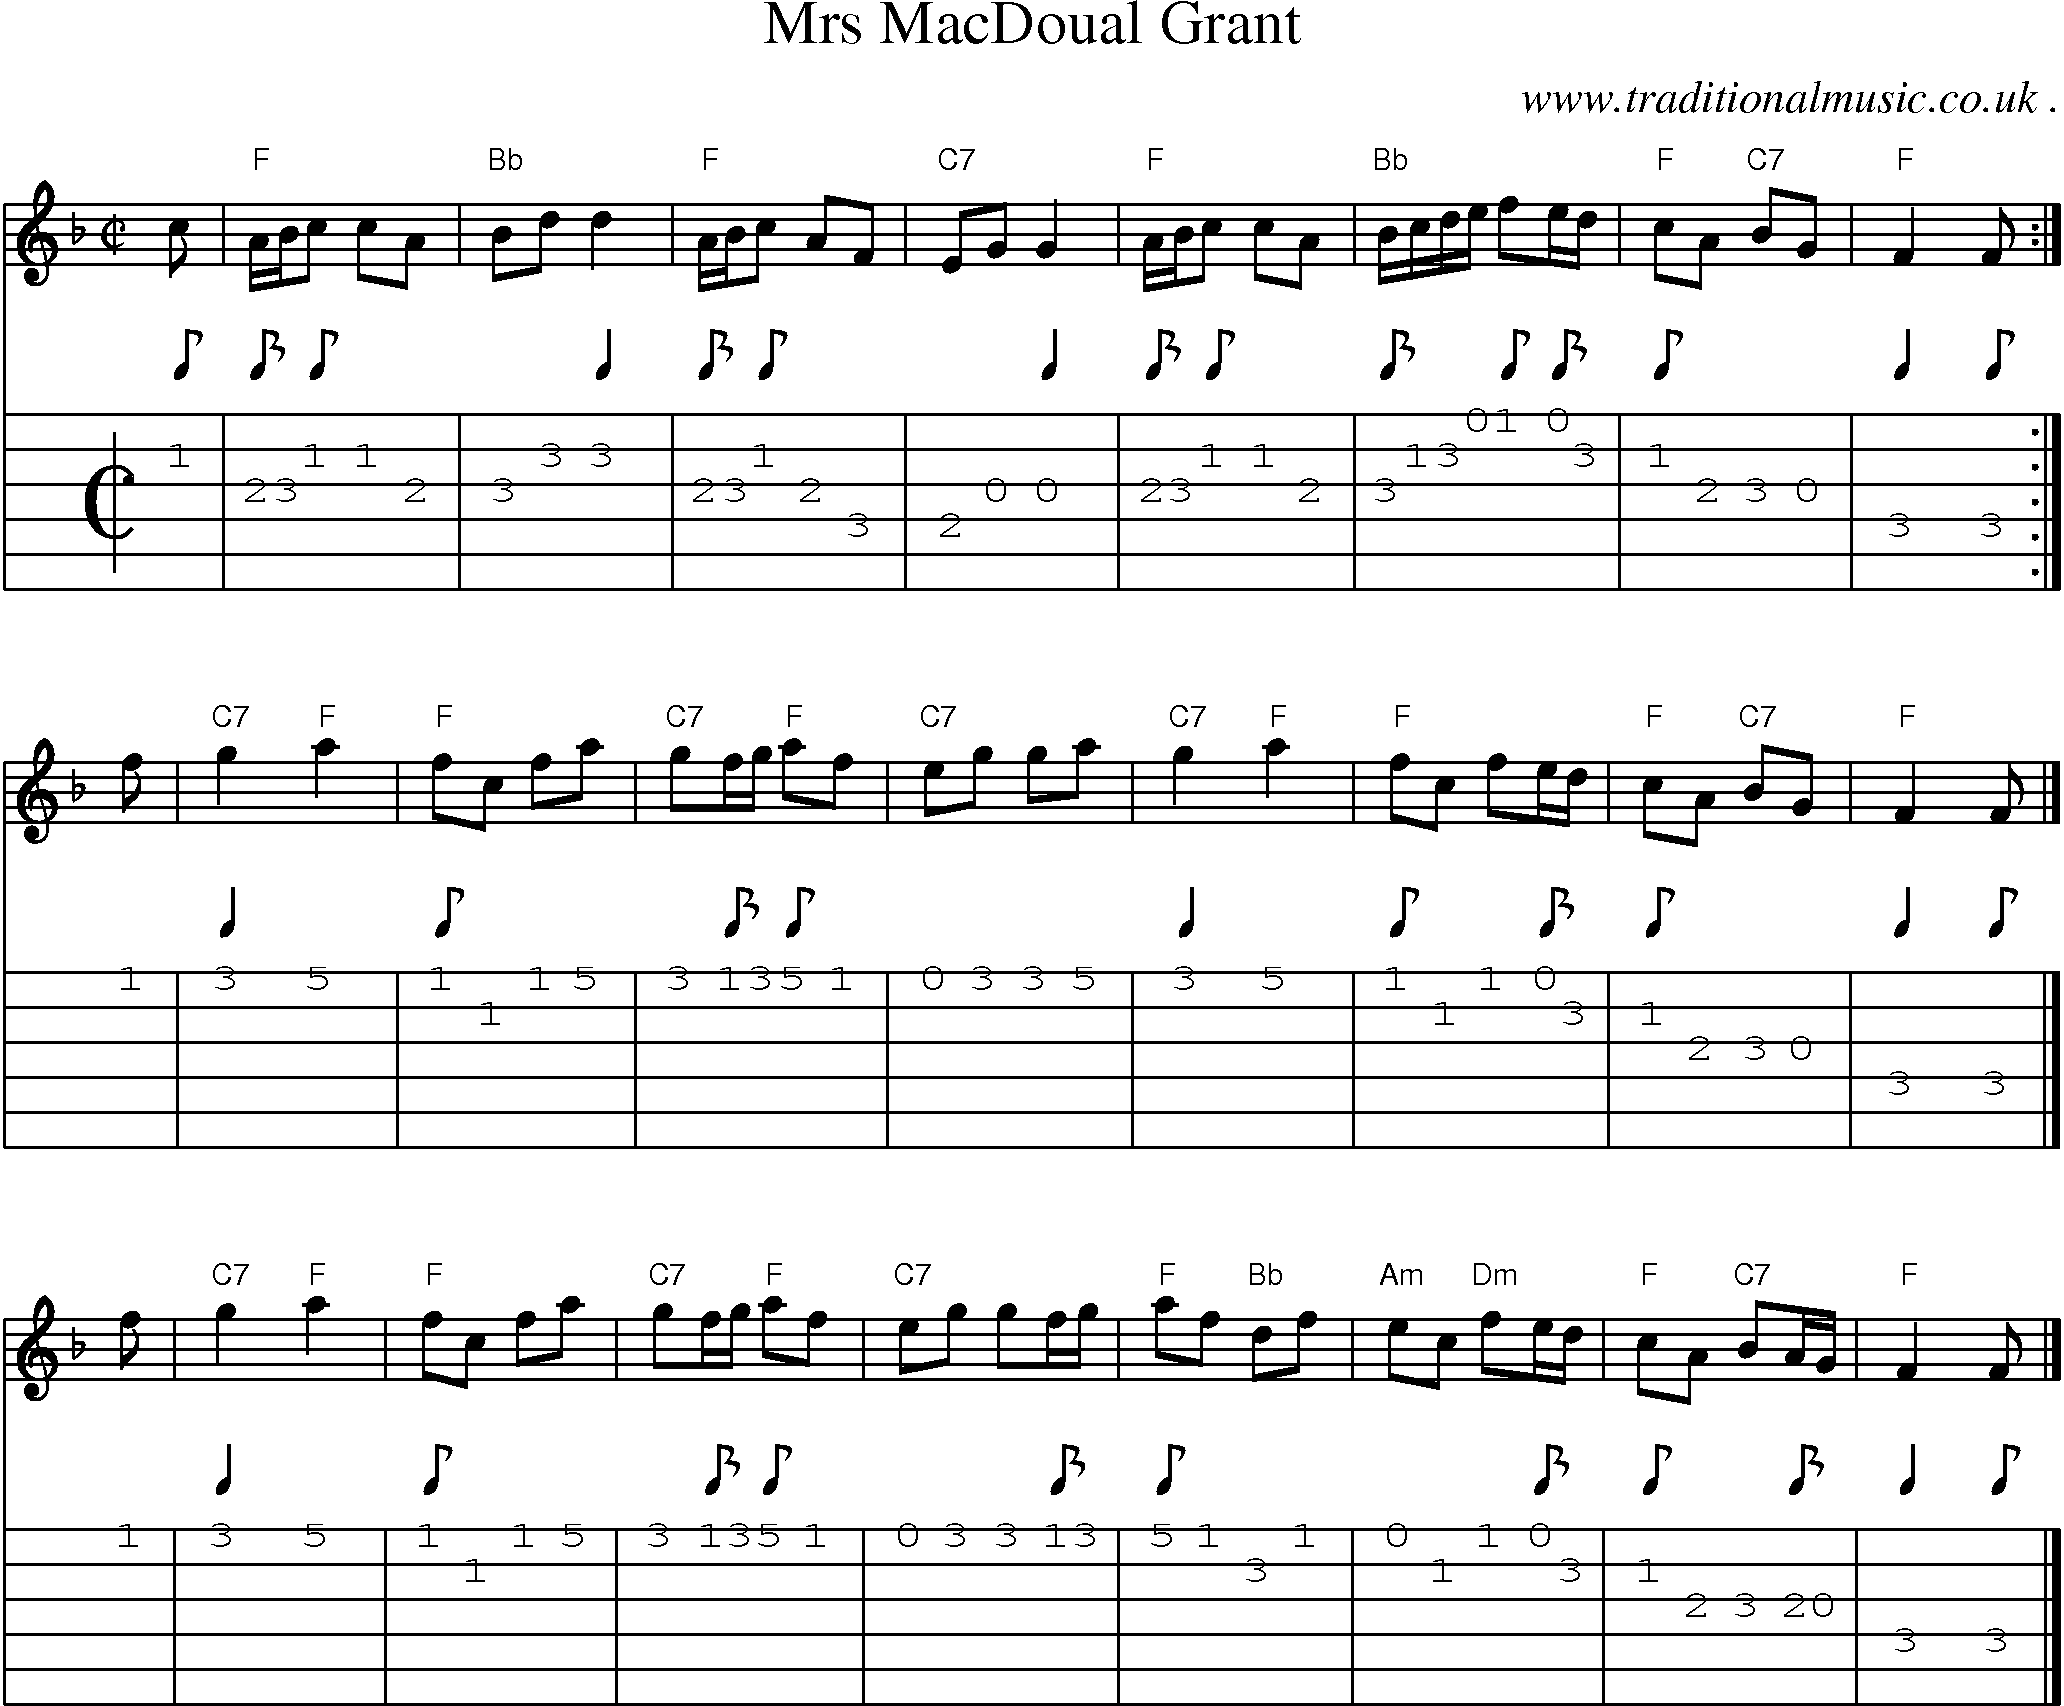 Sheet-music  score, Chords and Guitar Tabs for Mrs Macdoual Grant